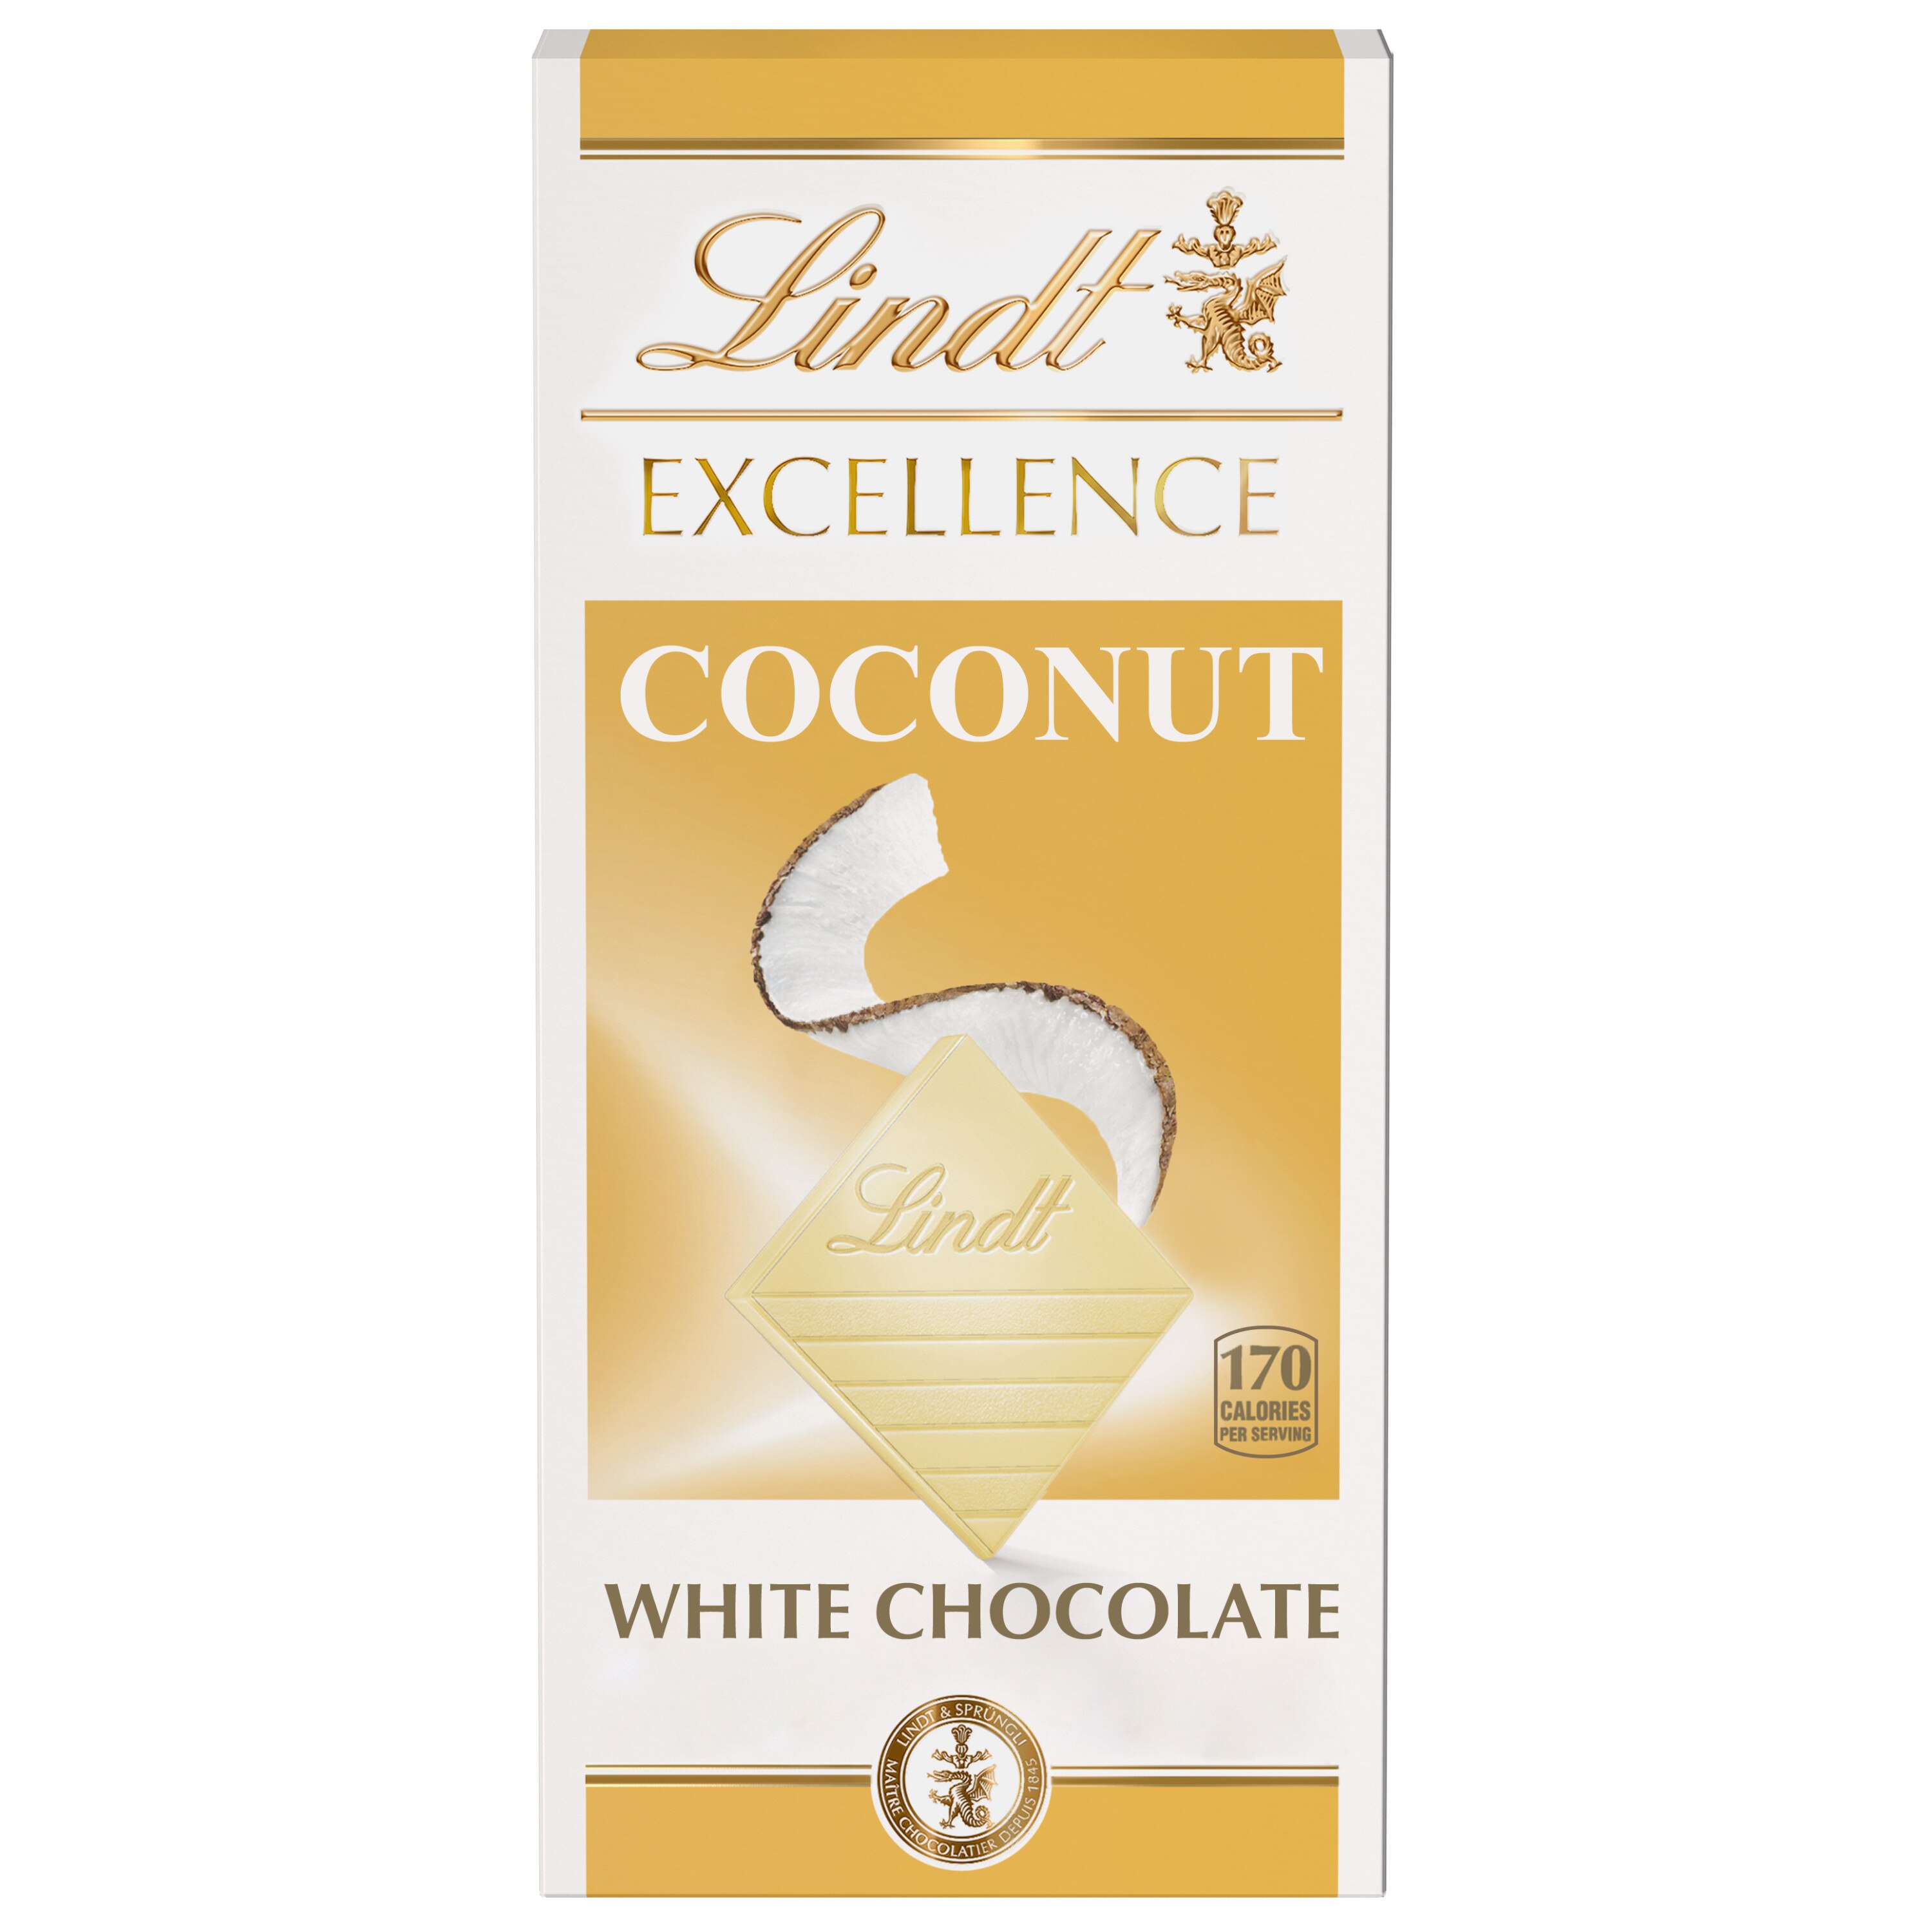 Lindt Excellence Coconut White Chocolate Candy Bar, 3.5 oz